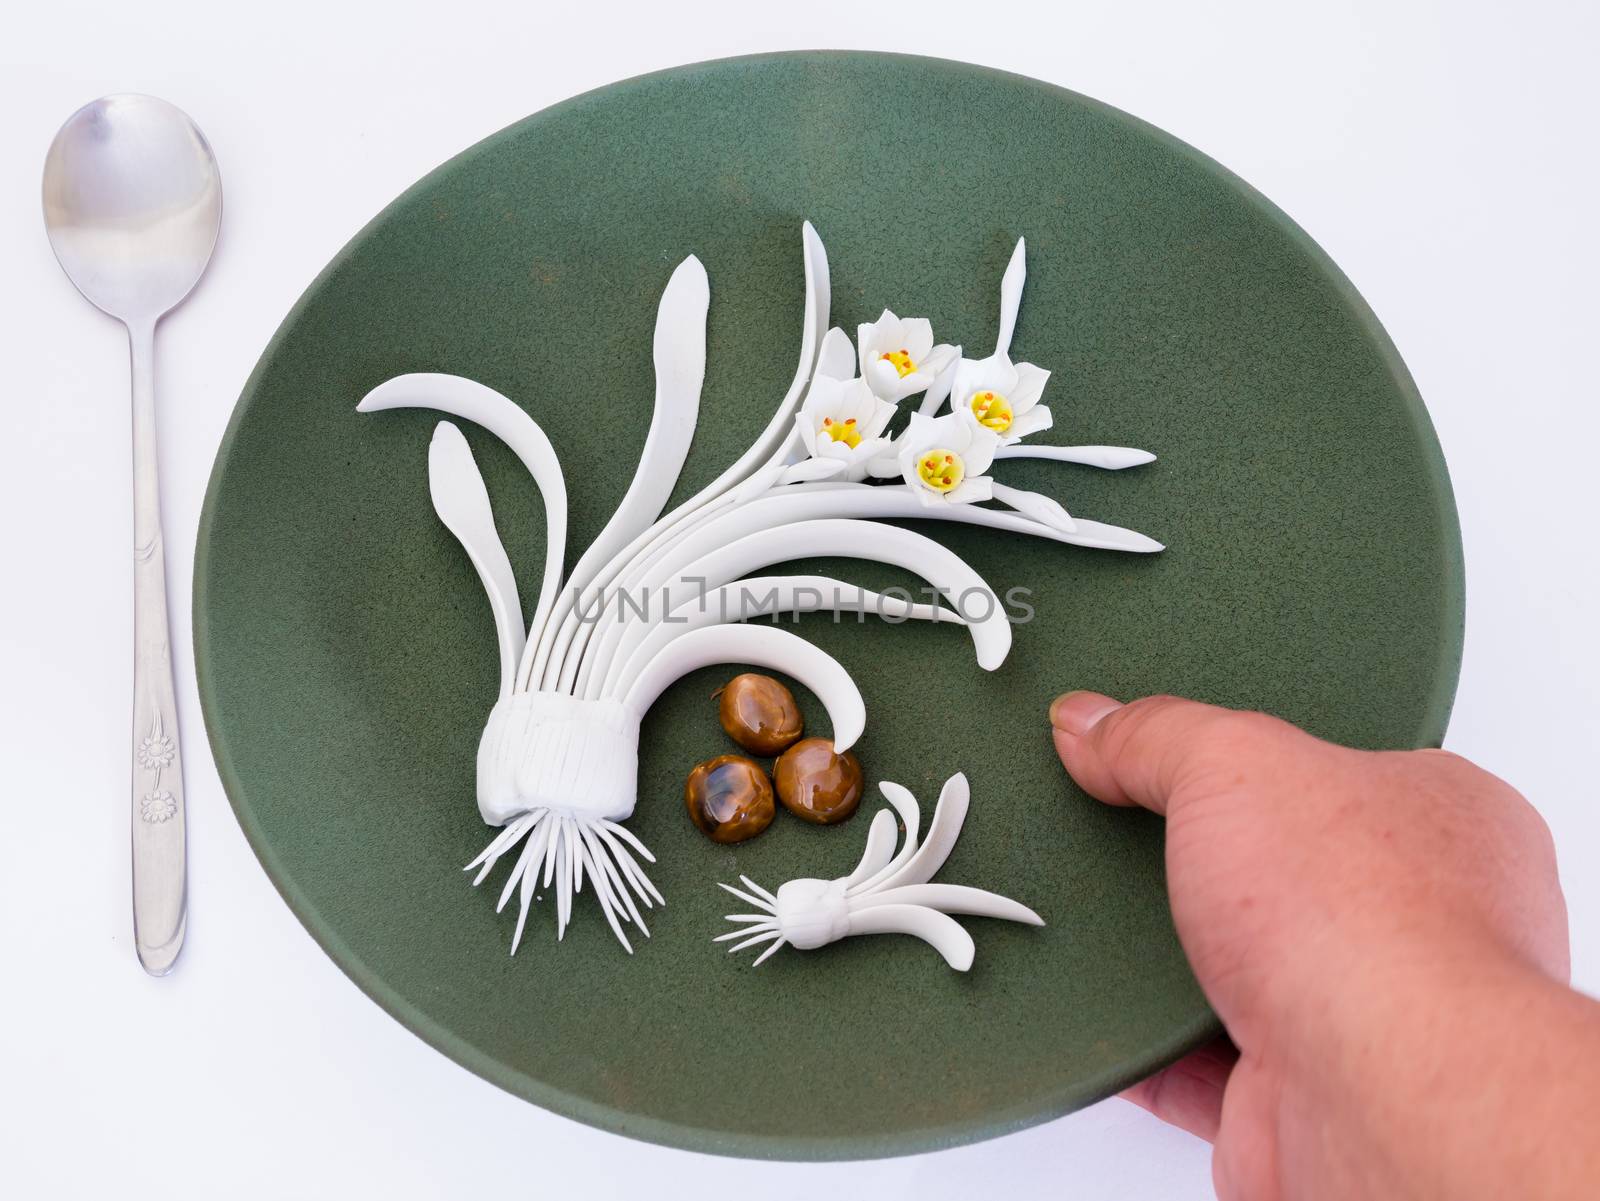 Dish decorated with flowers, which are handmade. Art is beautiful pottery